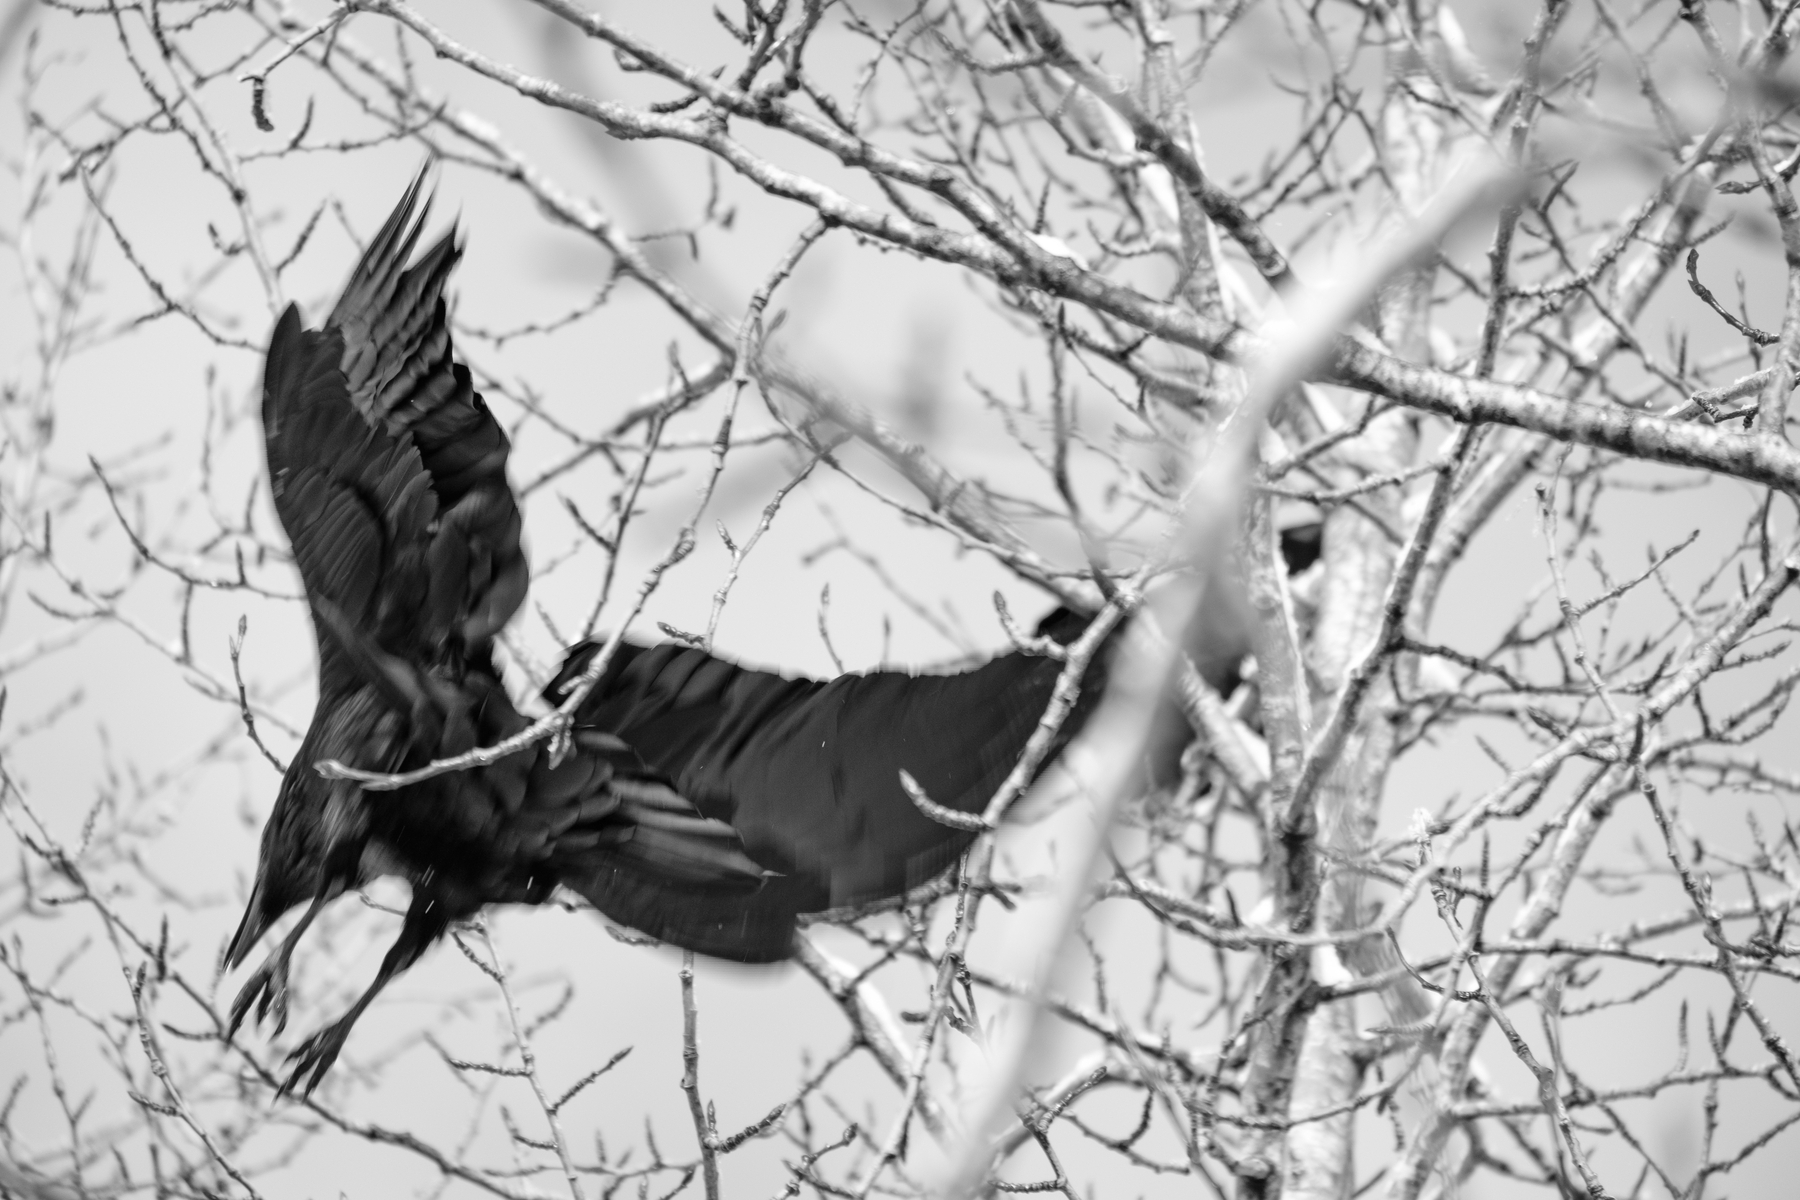 A blurry photo of a raven hopping from branch to branch